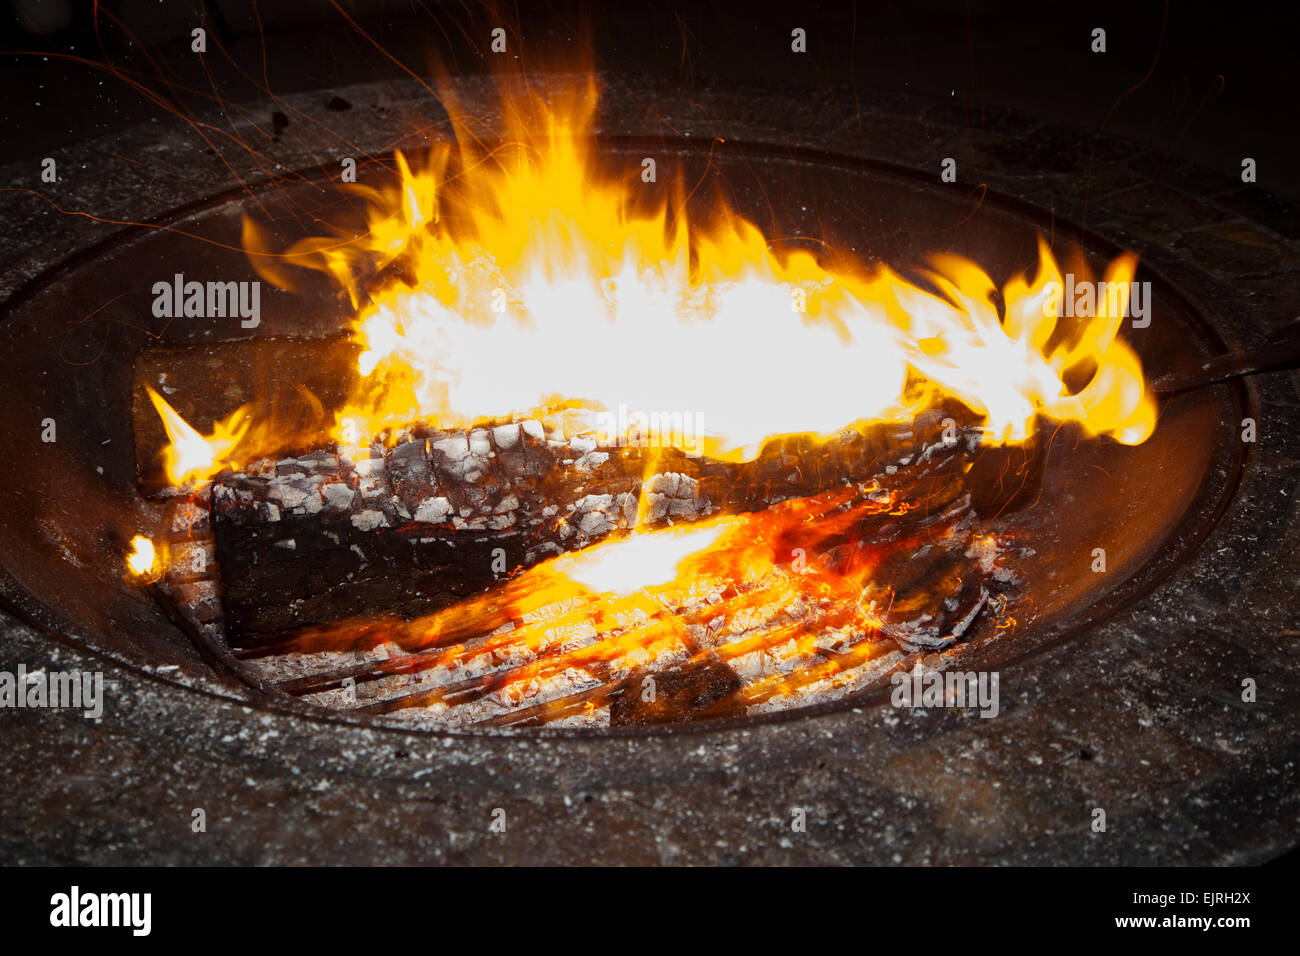 A fire glows brightly in a firepit. Ashes and embers are visible. Stock Photo